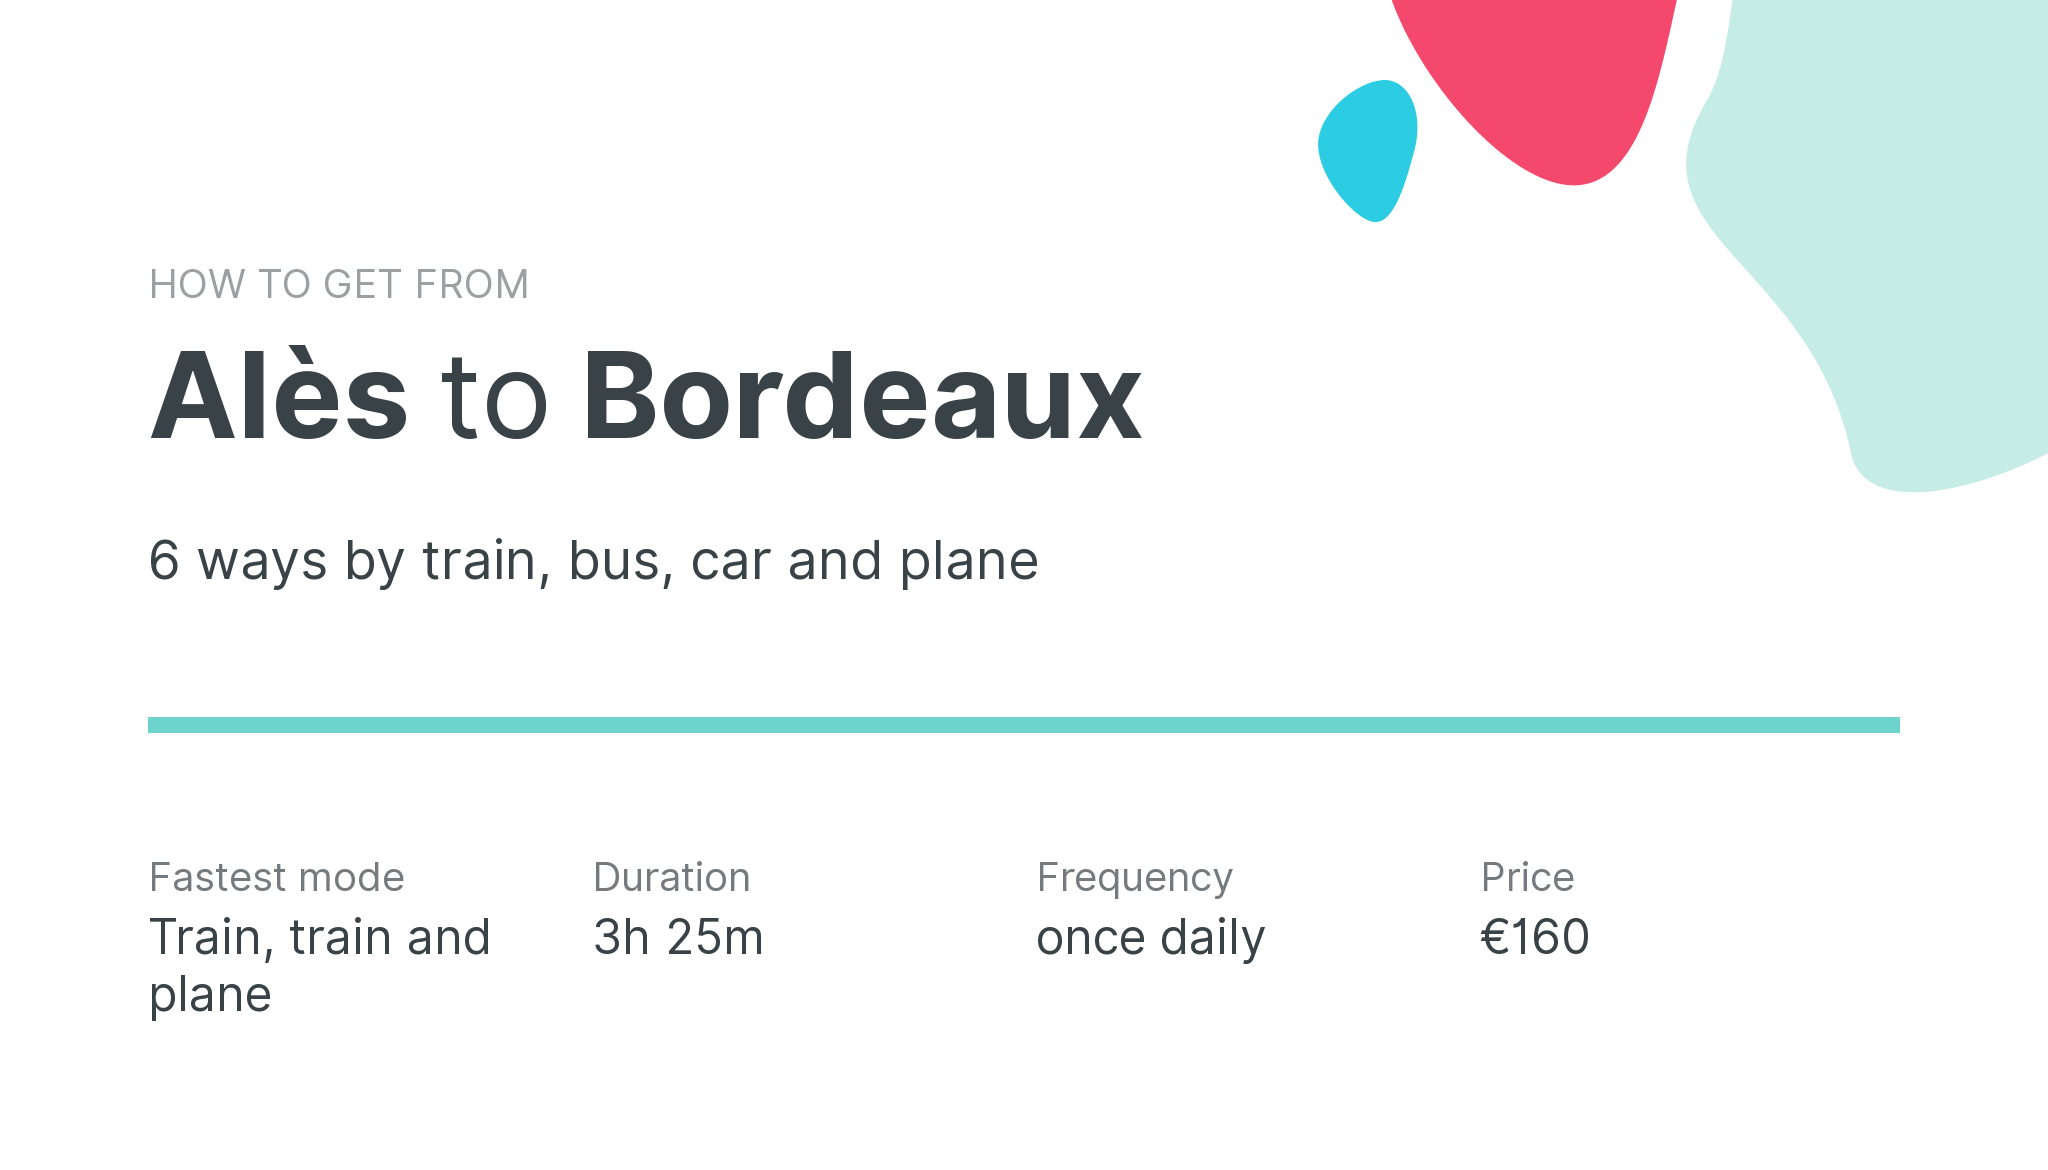 How do I get from Alès to Bordeaux